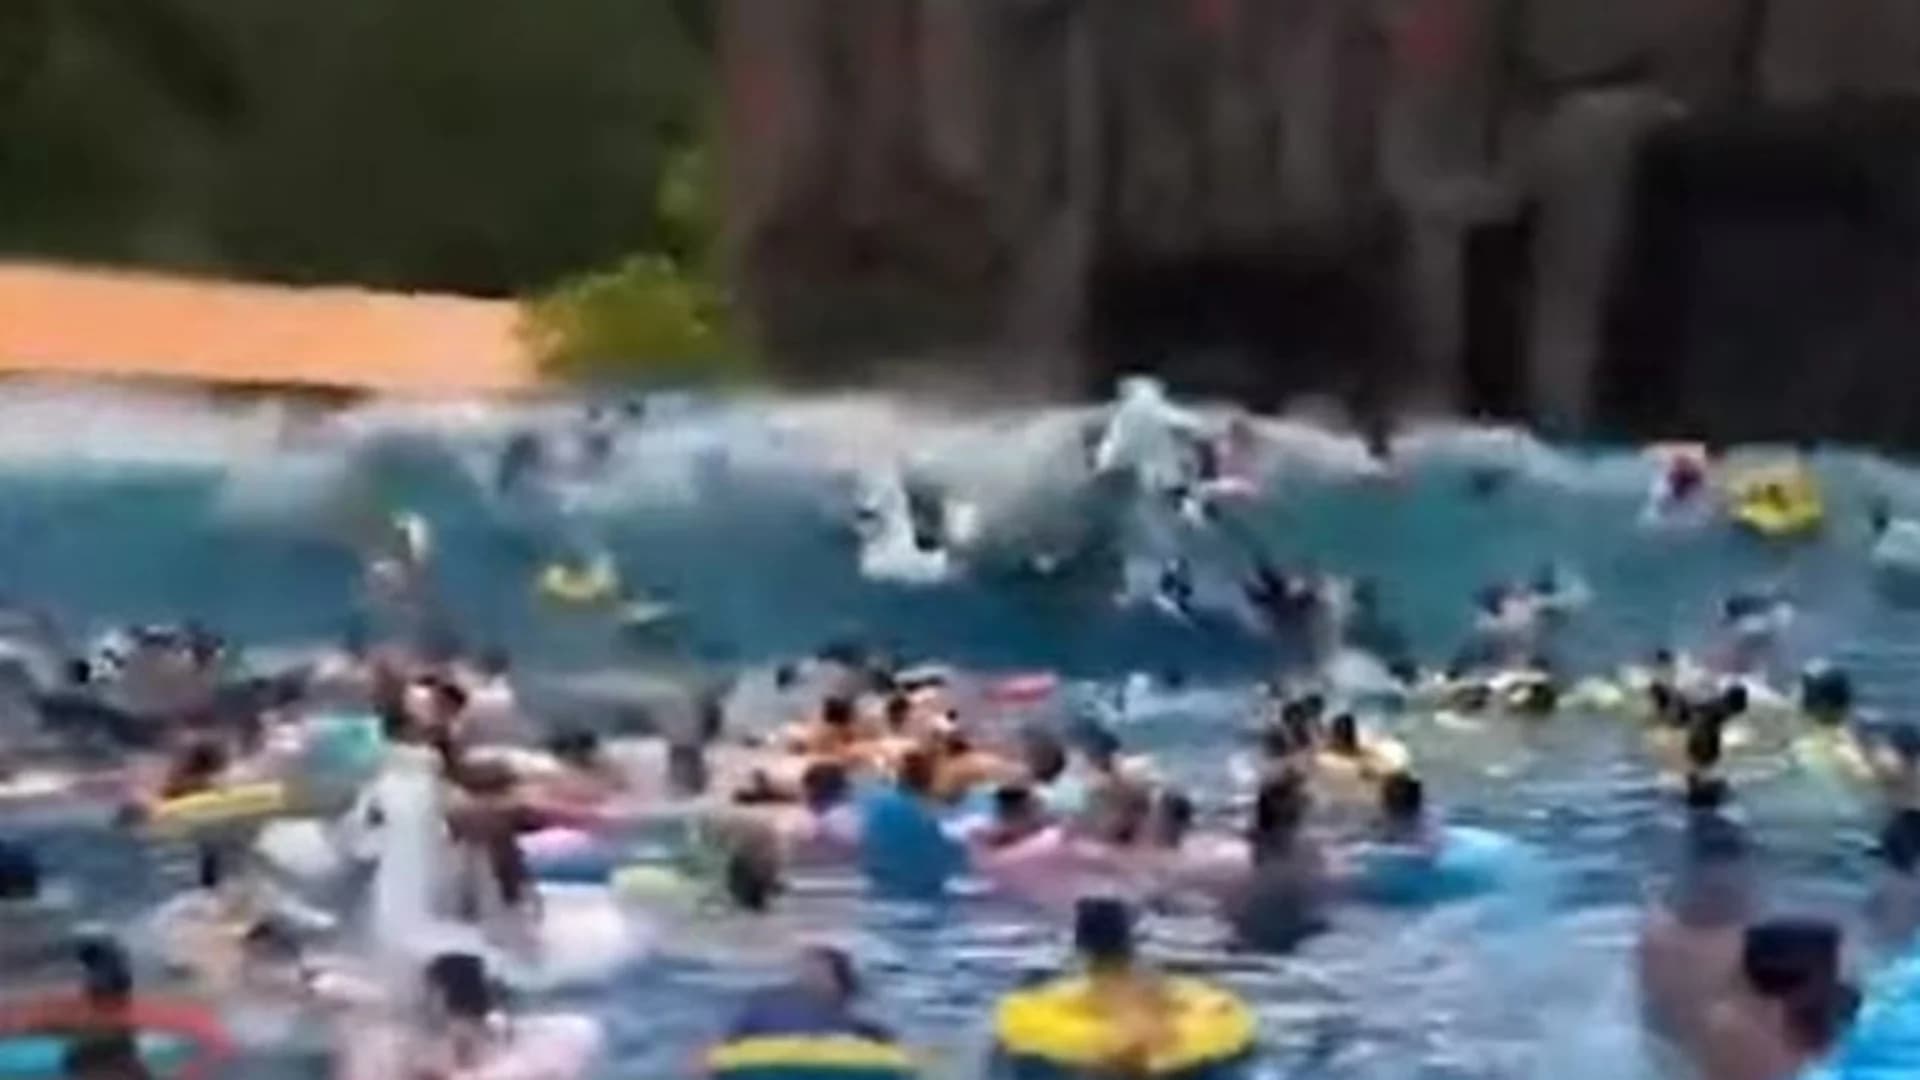 WATCH: 44 people injured in tsunami-like wave at Chinese water park